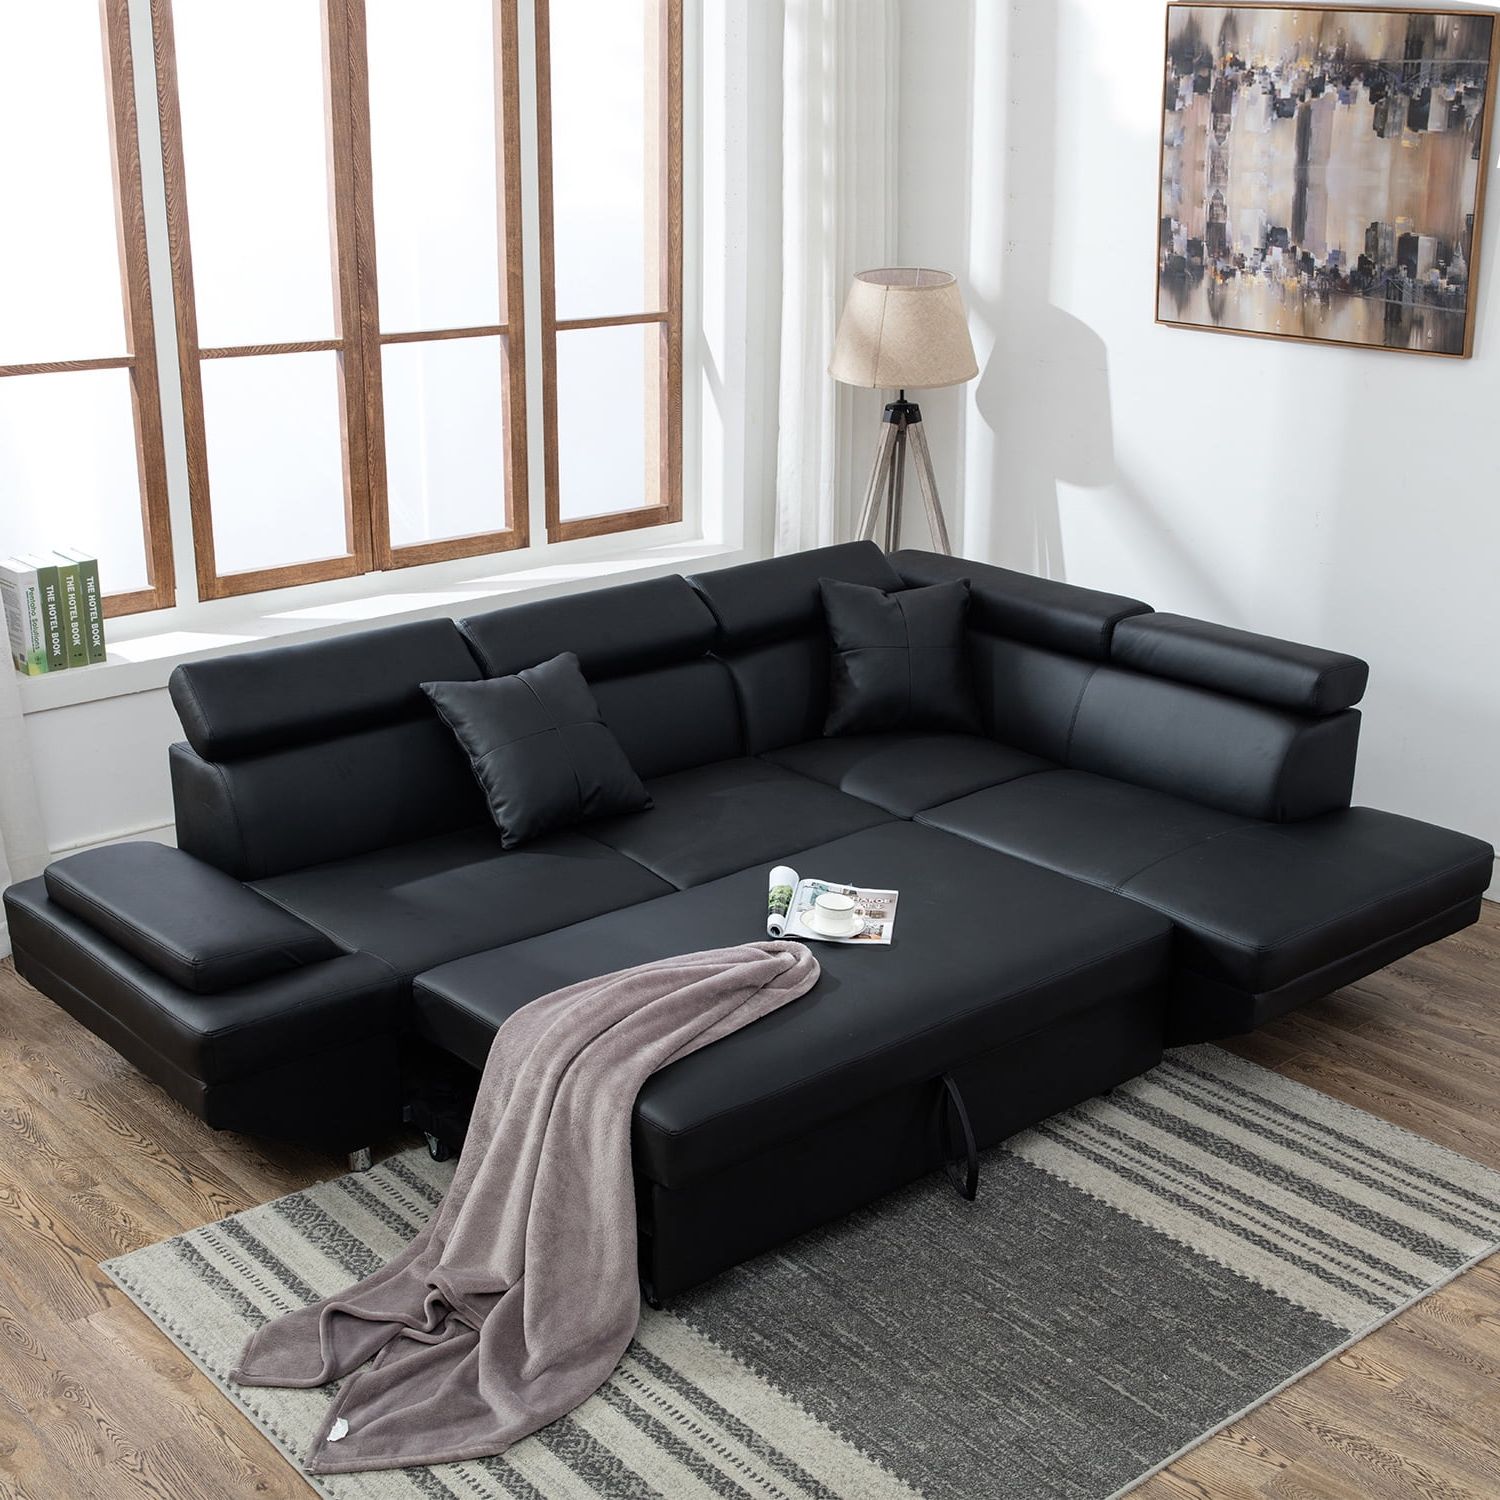 Best Choice Products 3 Seat L Shape Tufted Faux Leather Sectional Sofa Within 3 Seat L Shaped Sofas In Black (Gallery 2 of 20)